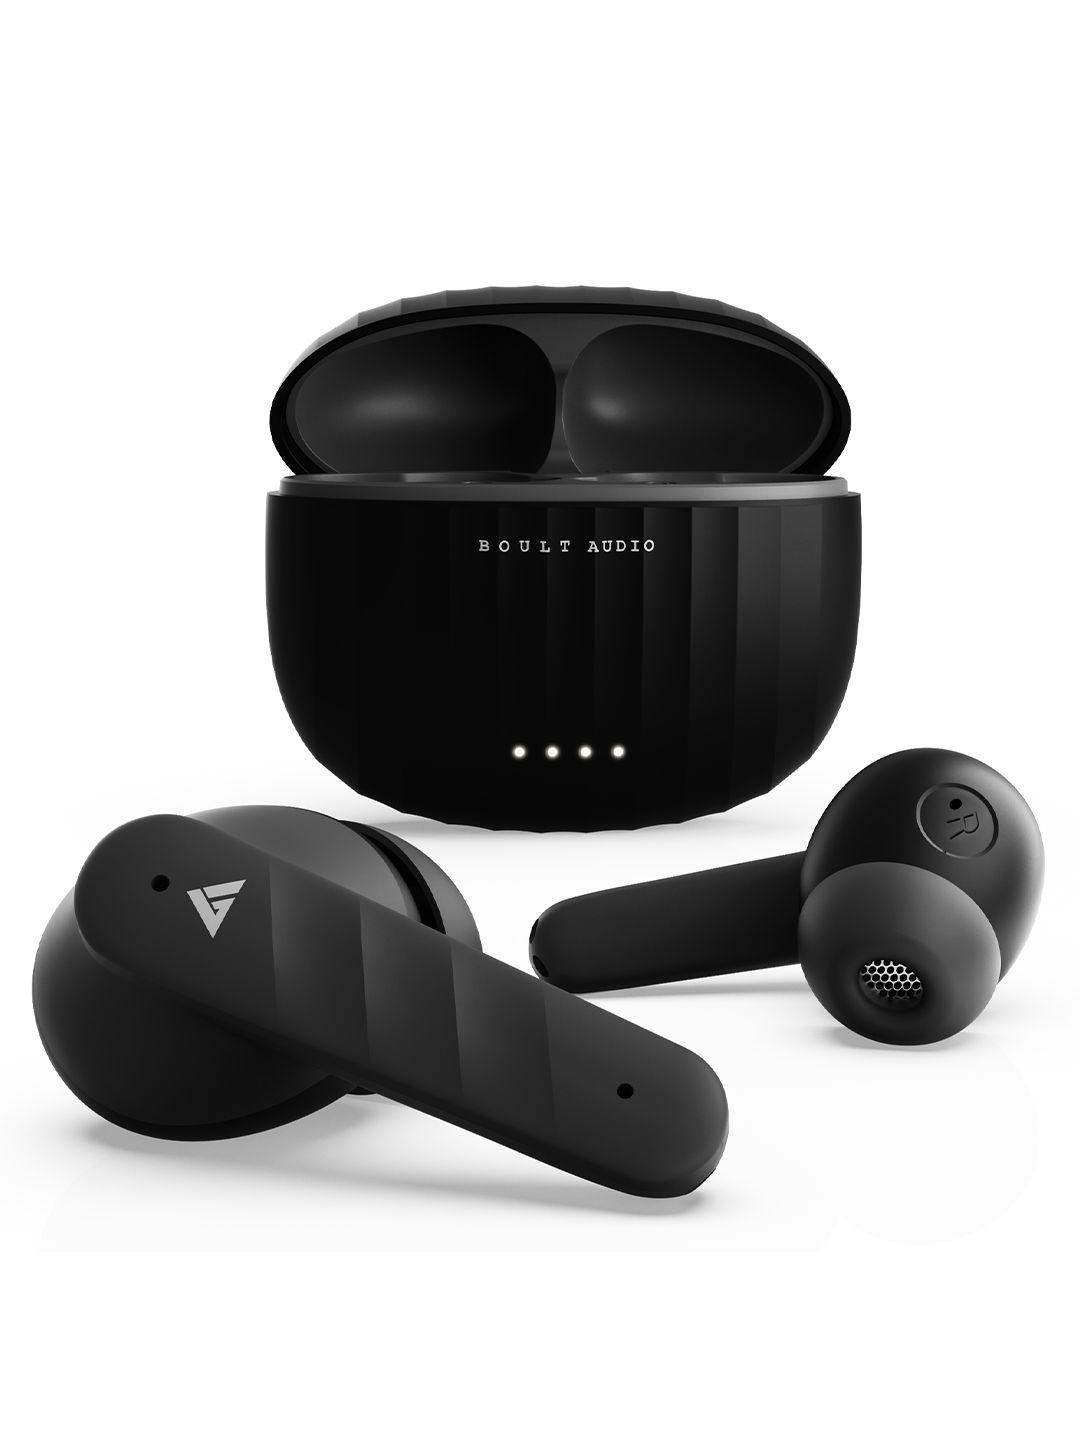 boult audio airbass x 45 true wireless earbuds with enc mic & 40h playtime